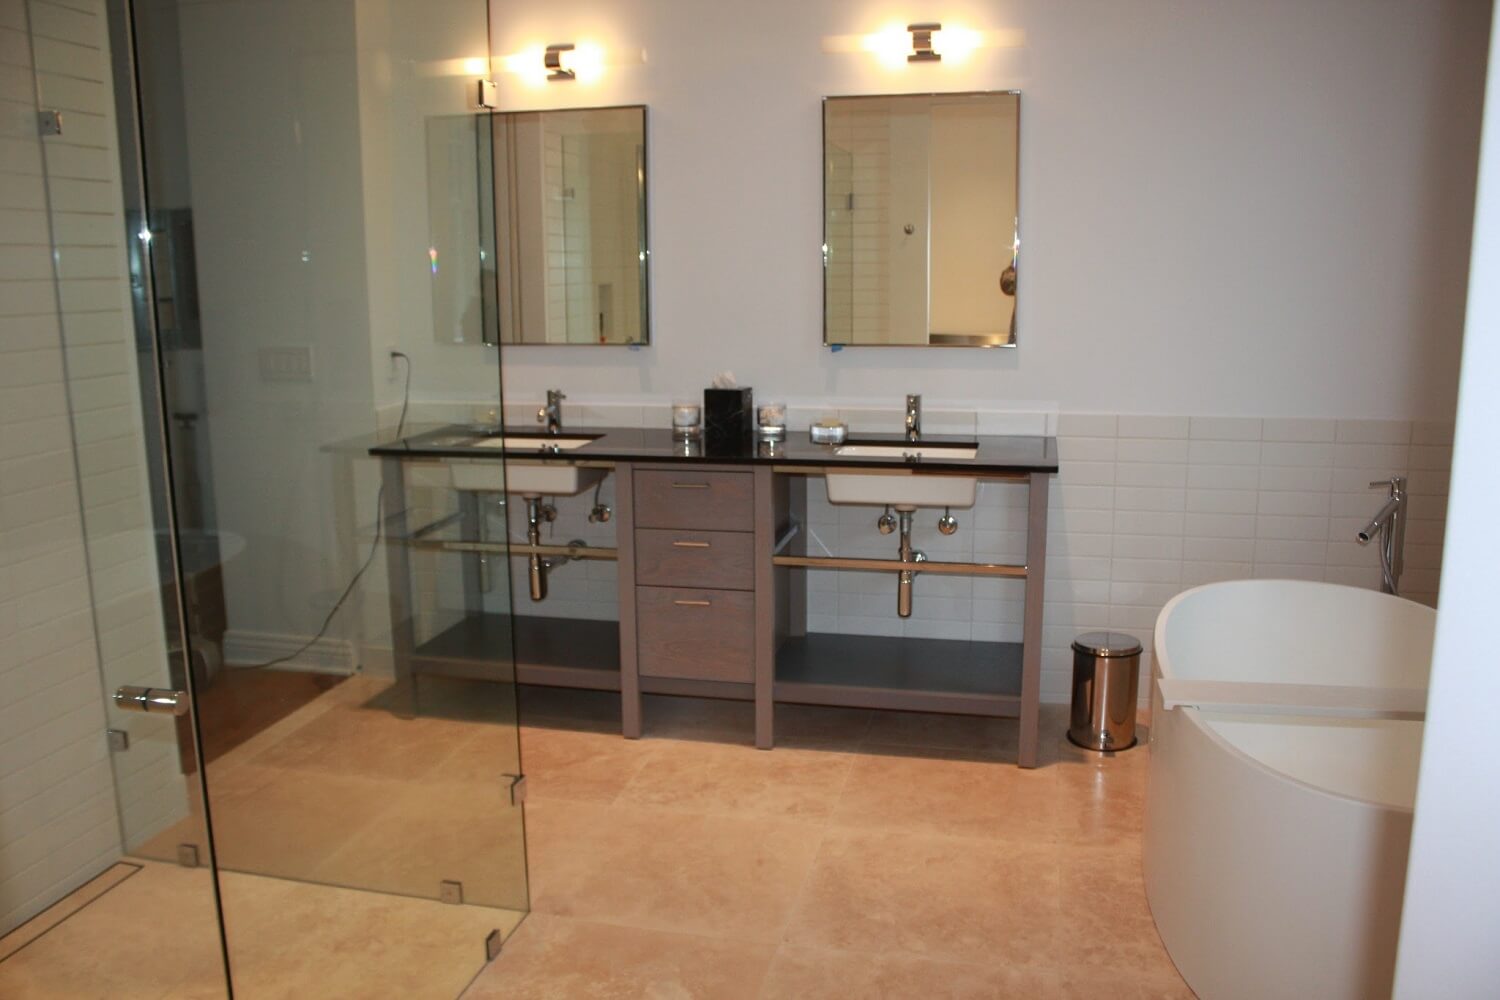 Bathroom Design & Remodeling by Topp Remodeling & Construction